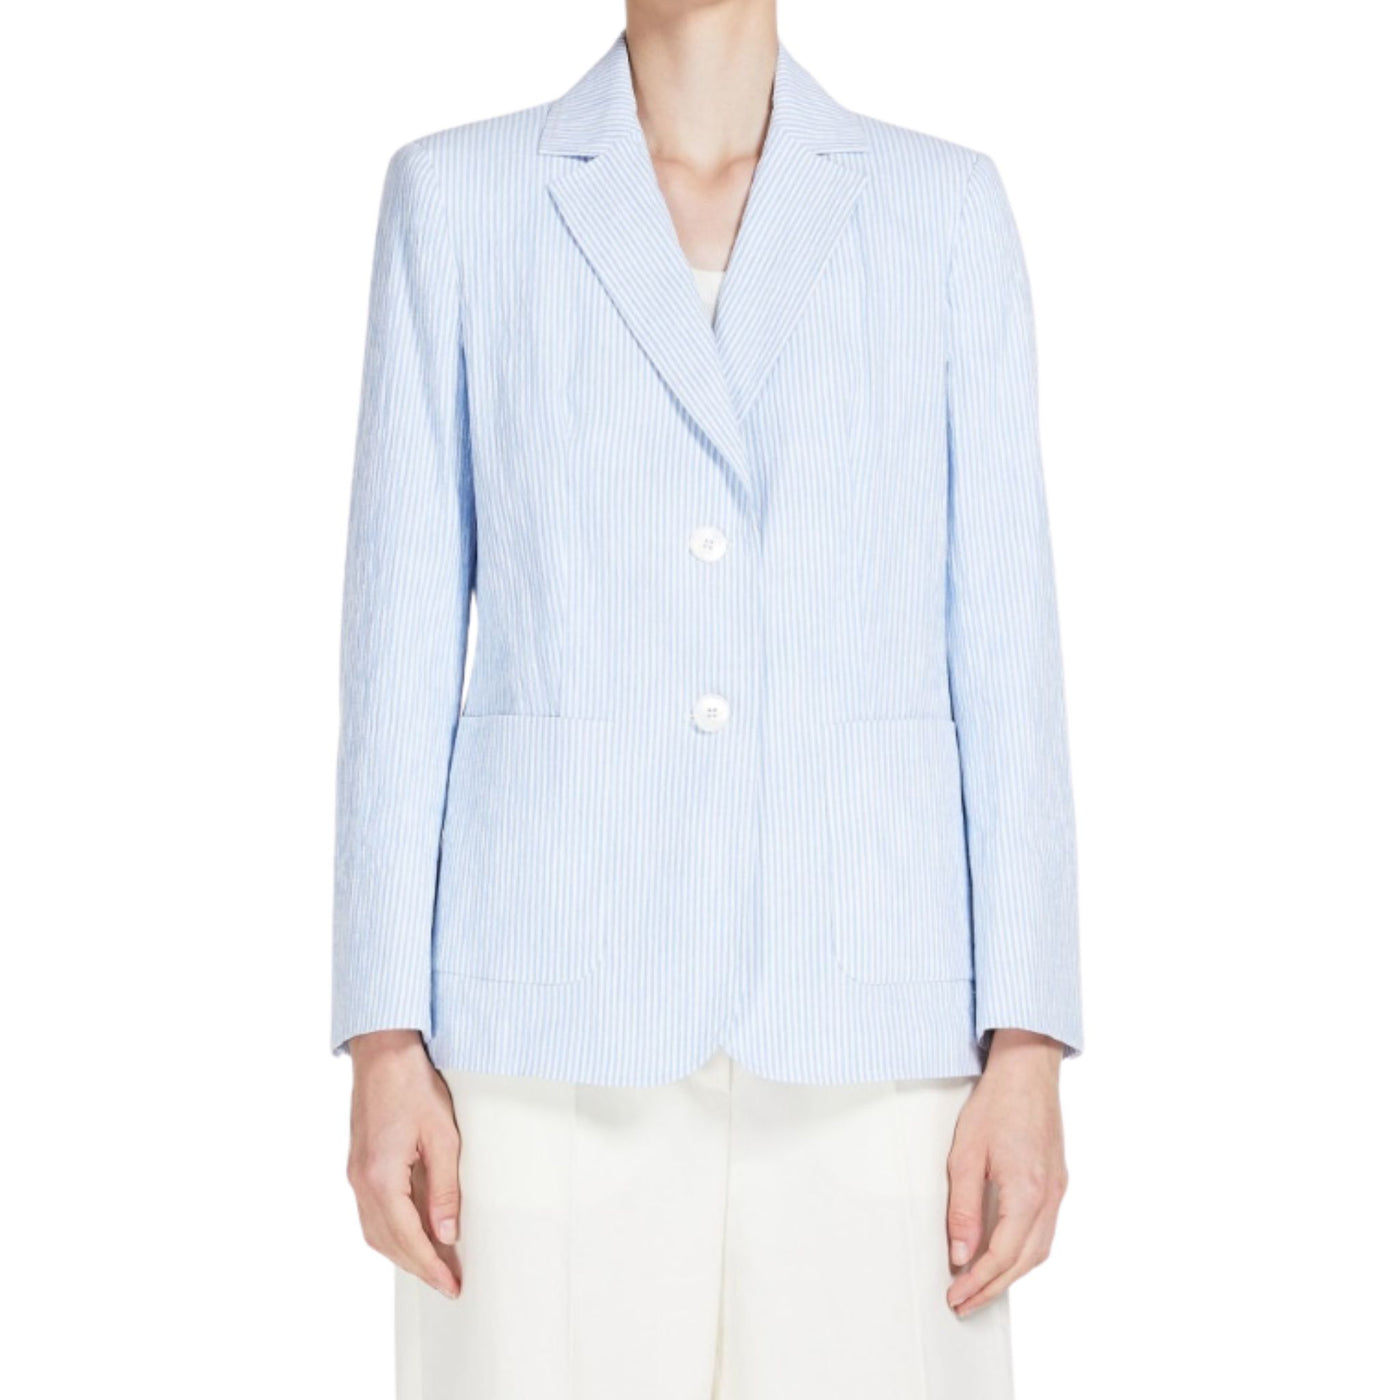 Women's jacket with lapel collar